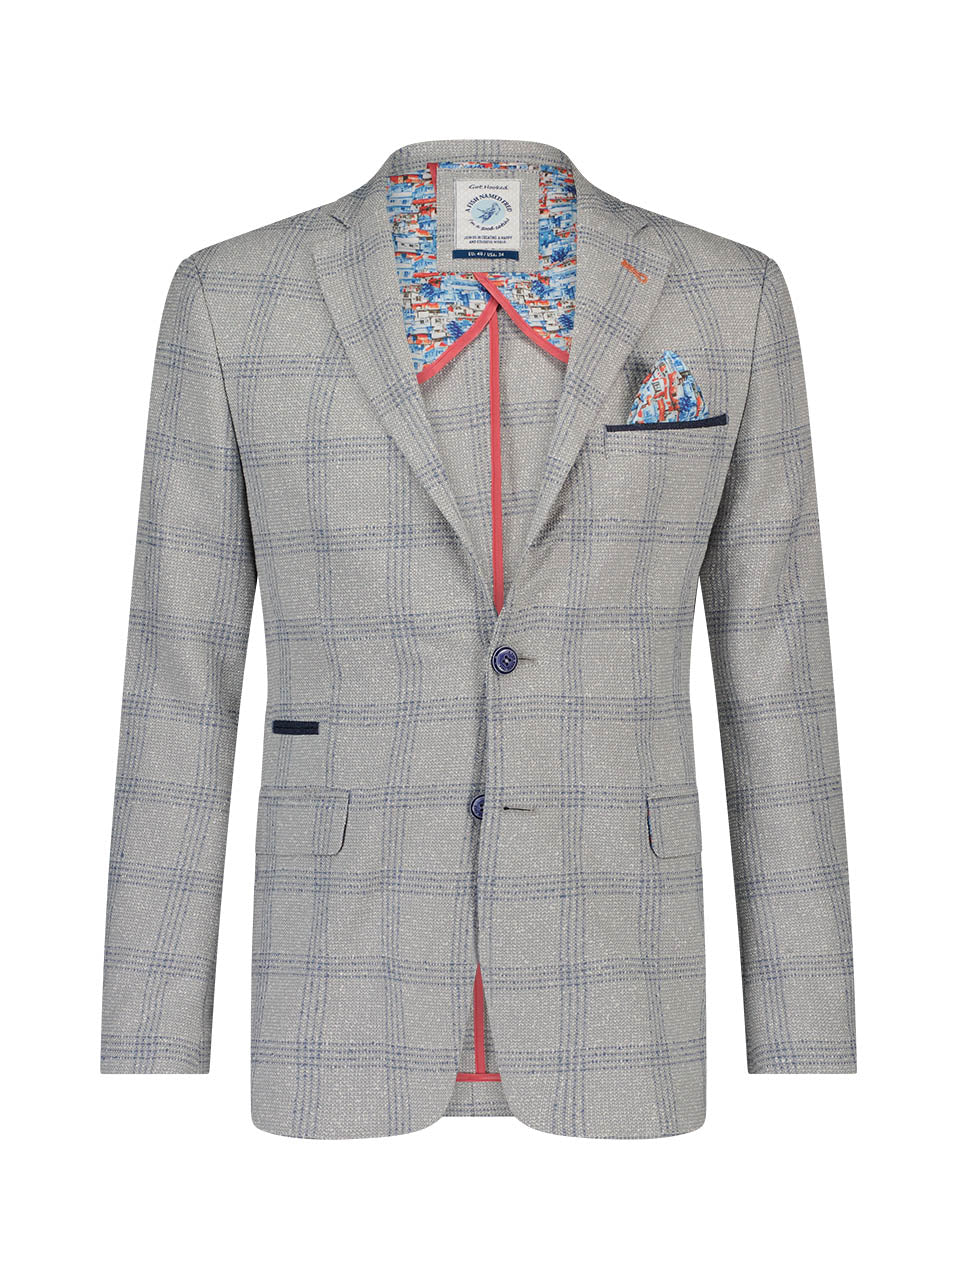 A Fish Named Fred - Linen Check Jacket in Grey/Blue